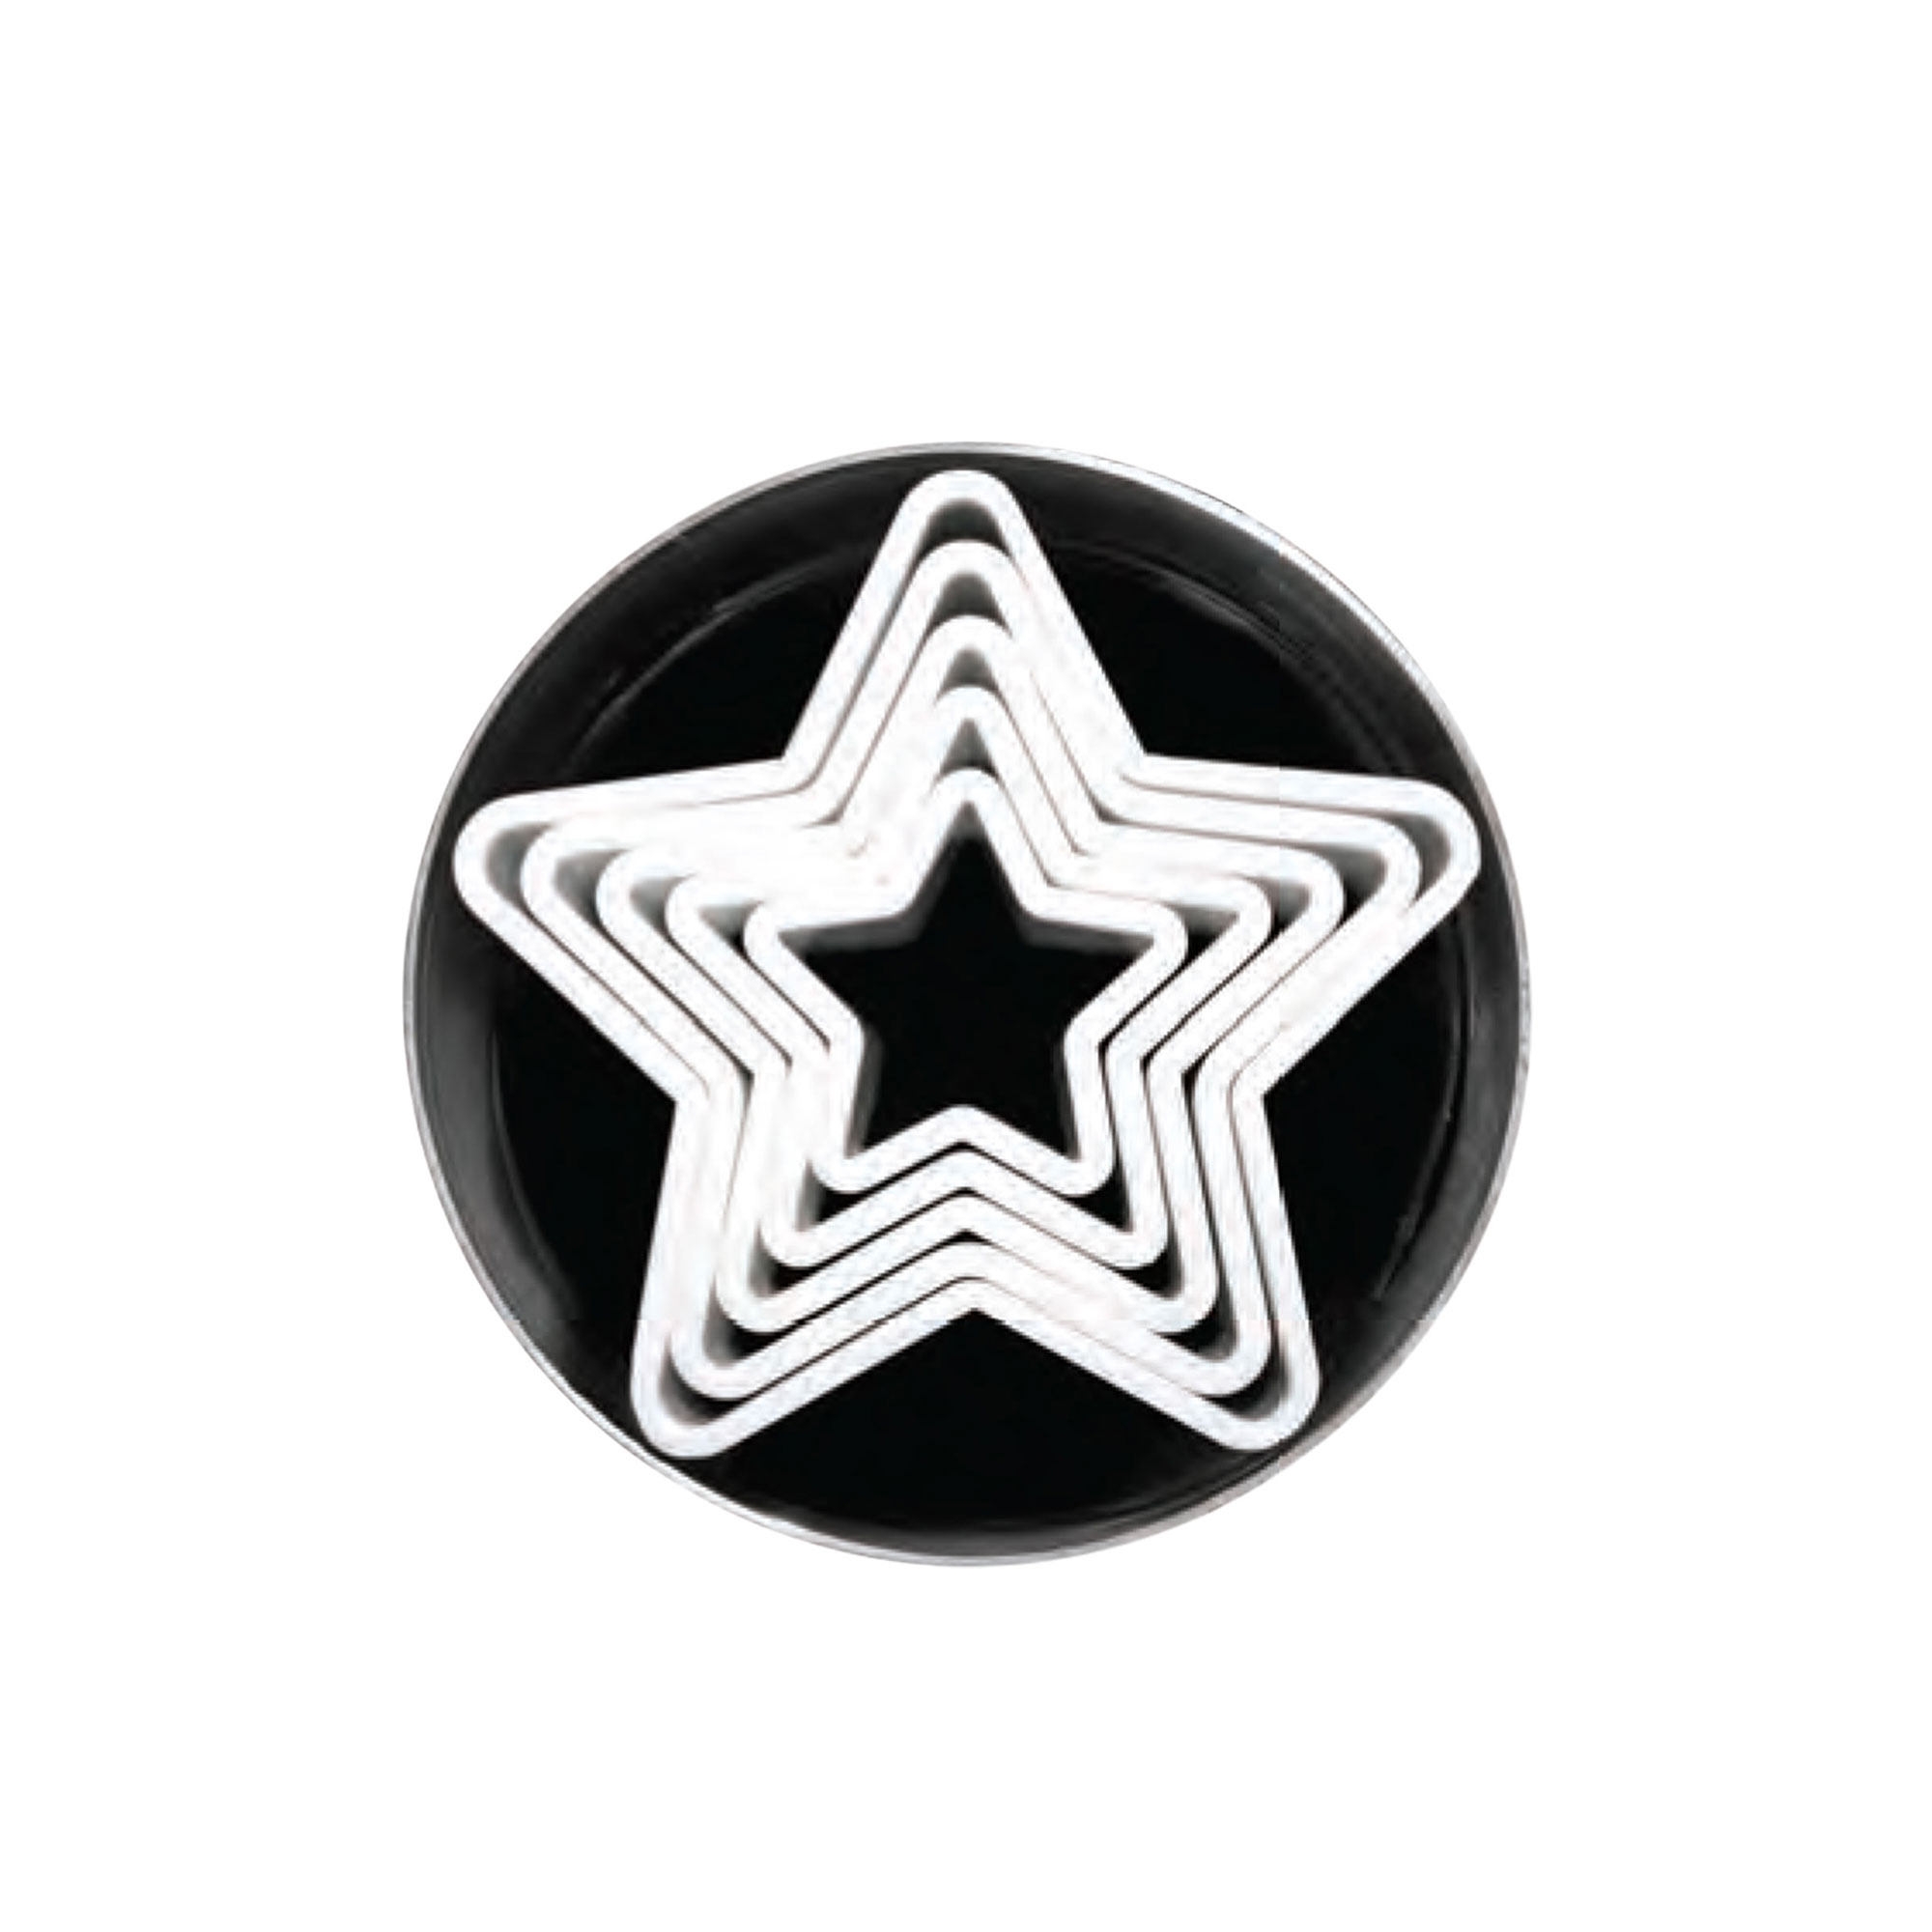 Loyal Star Cookie Cutter Set 5pc Image 1